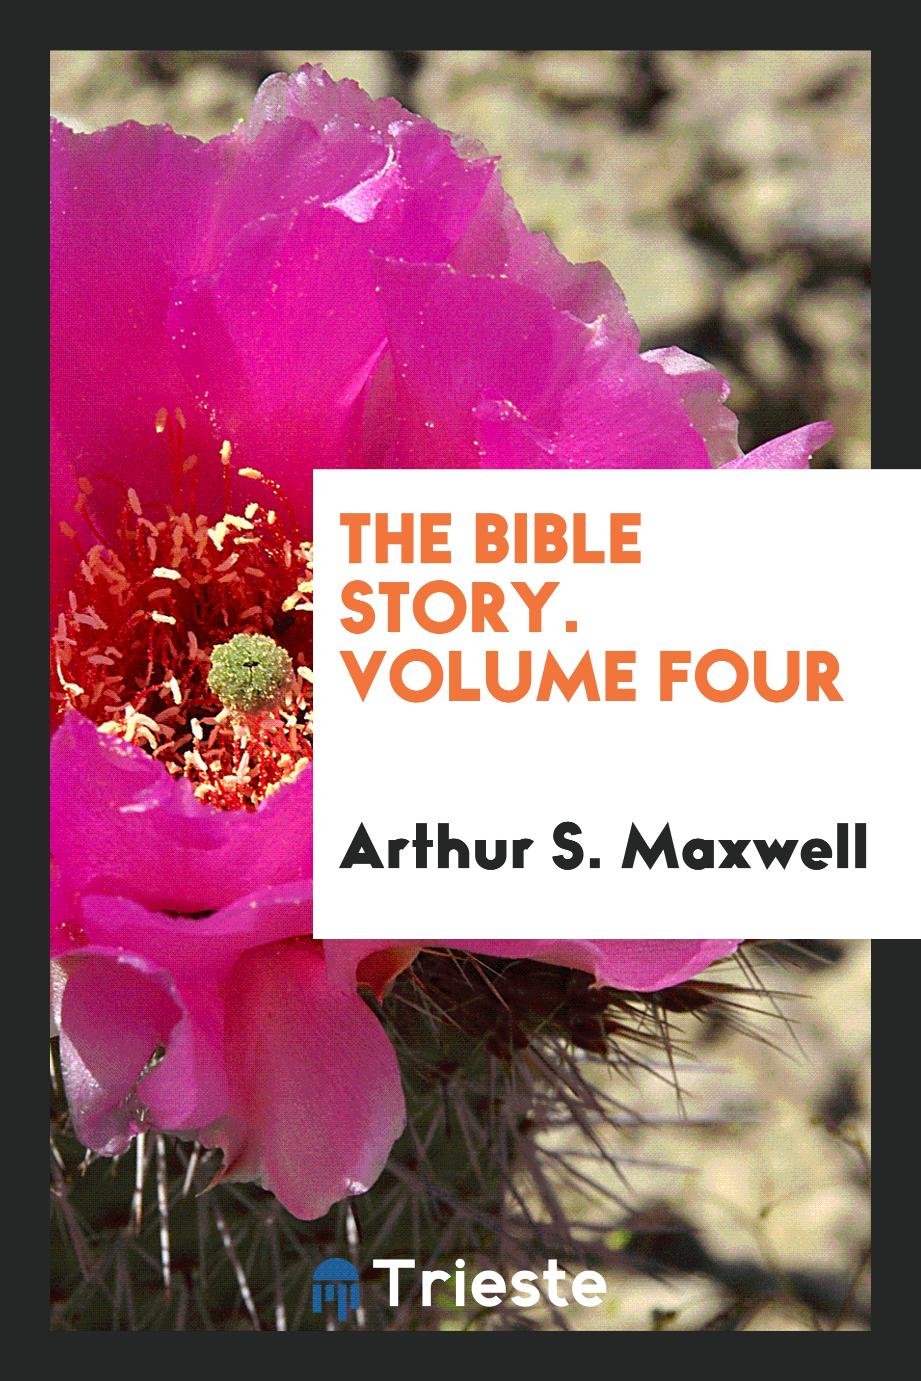 Arthur S. Maxwell - The Bible story. Volume Four